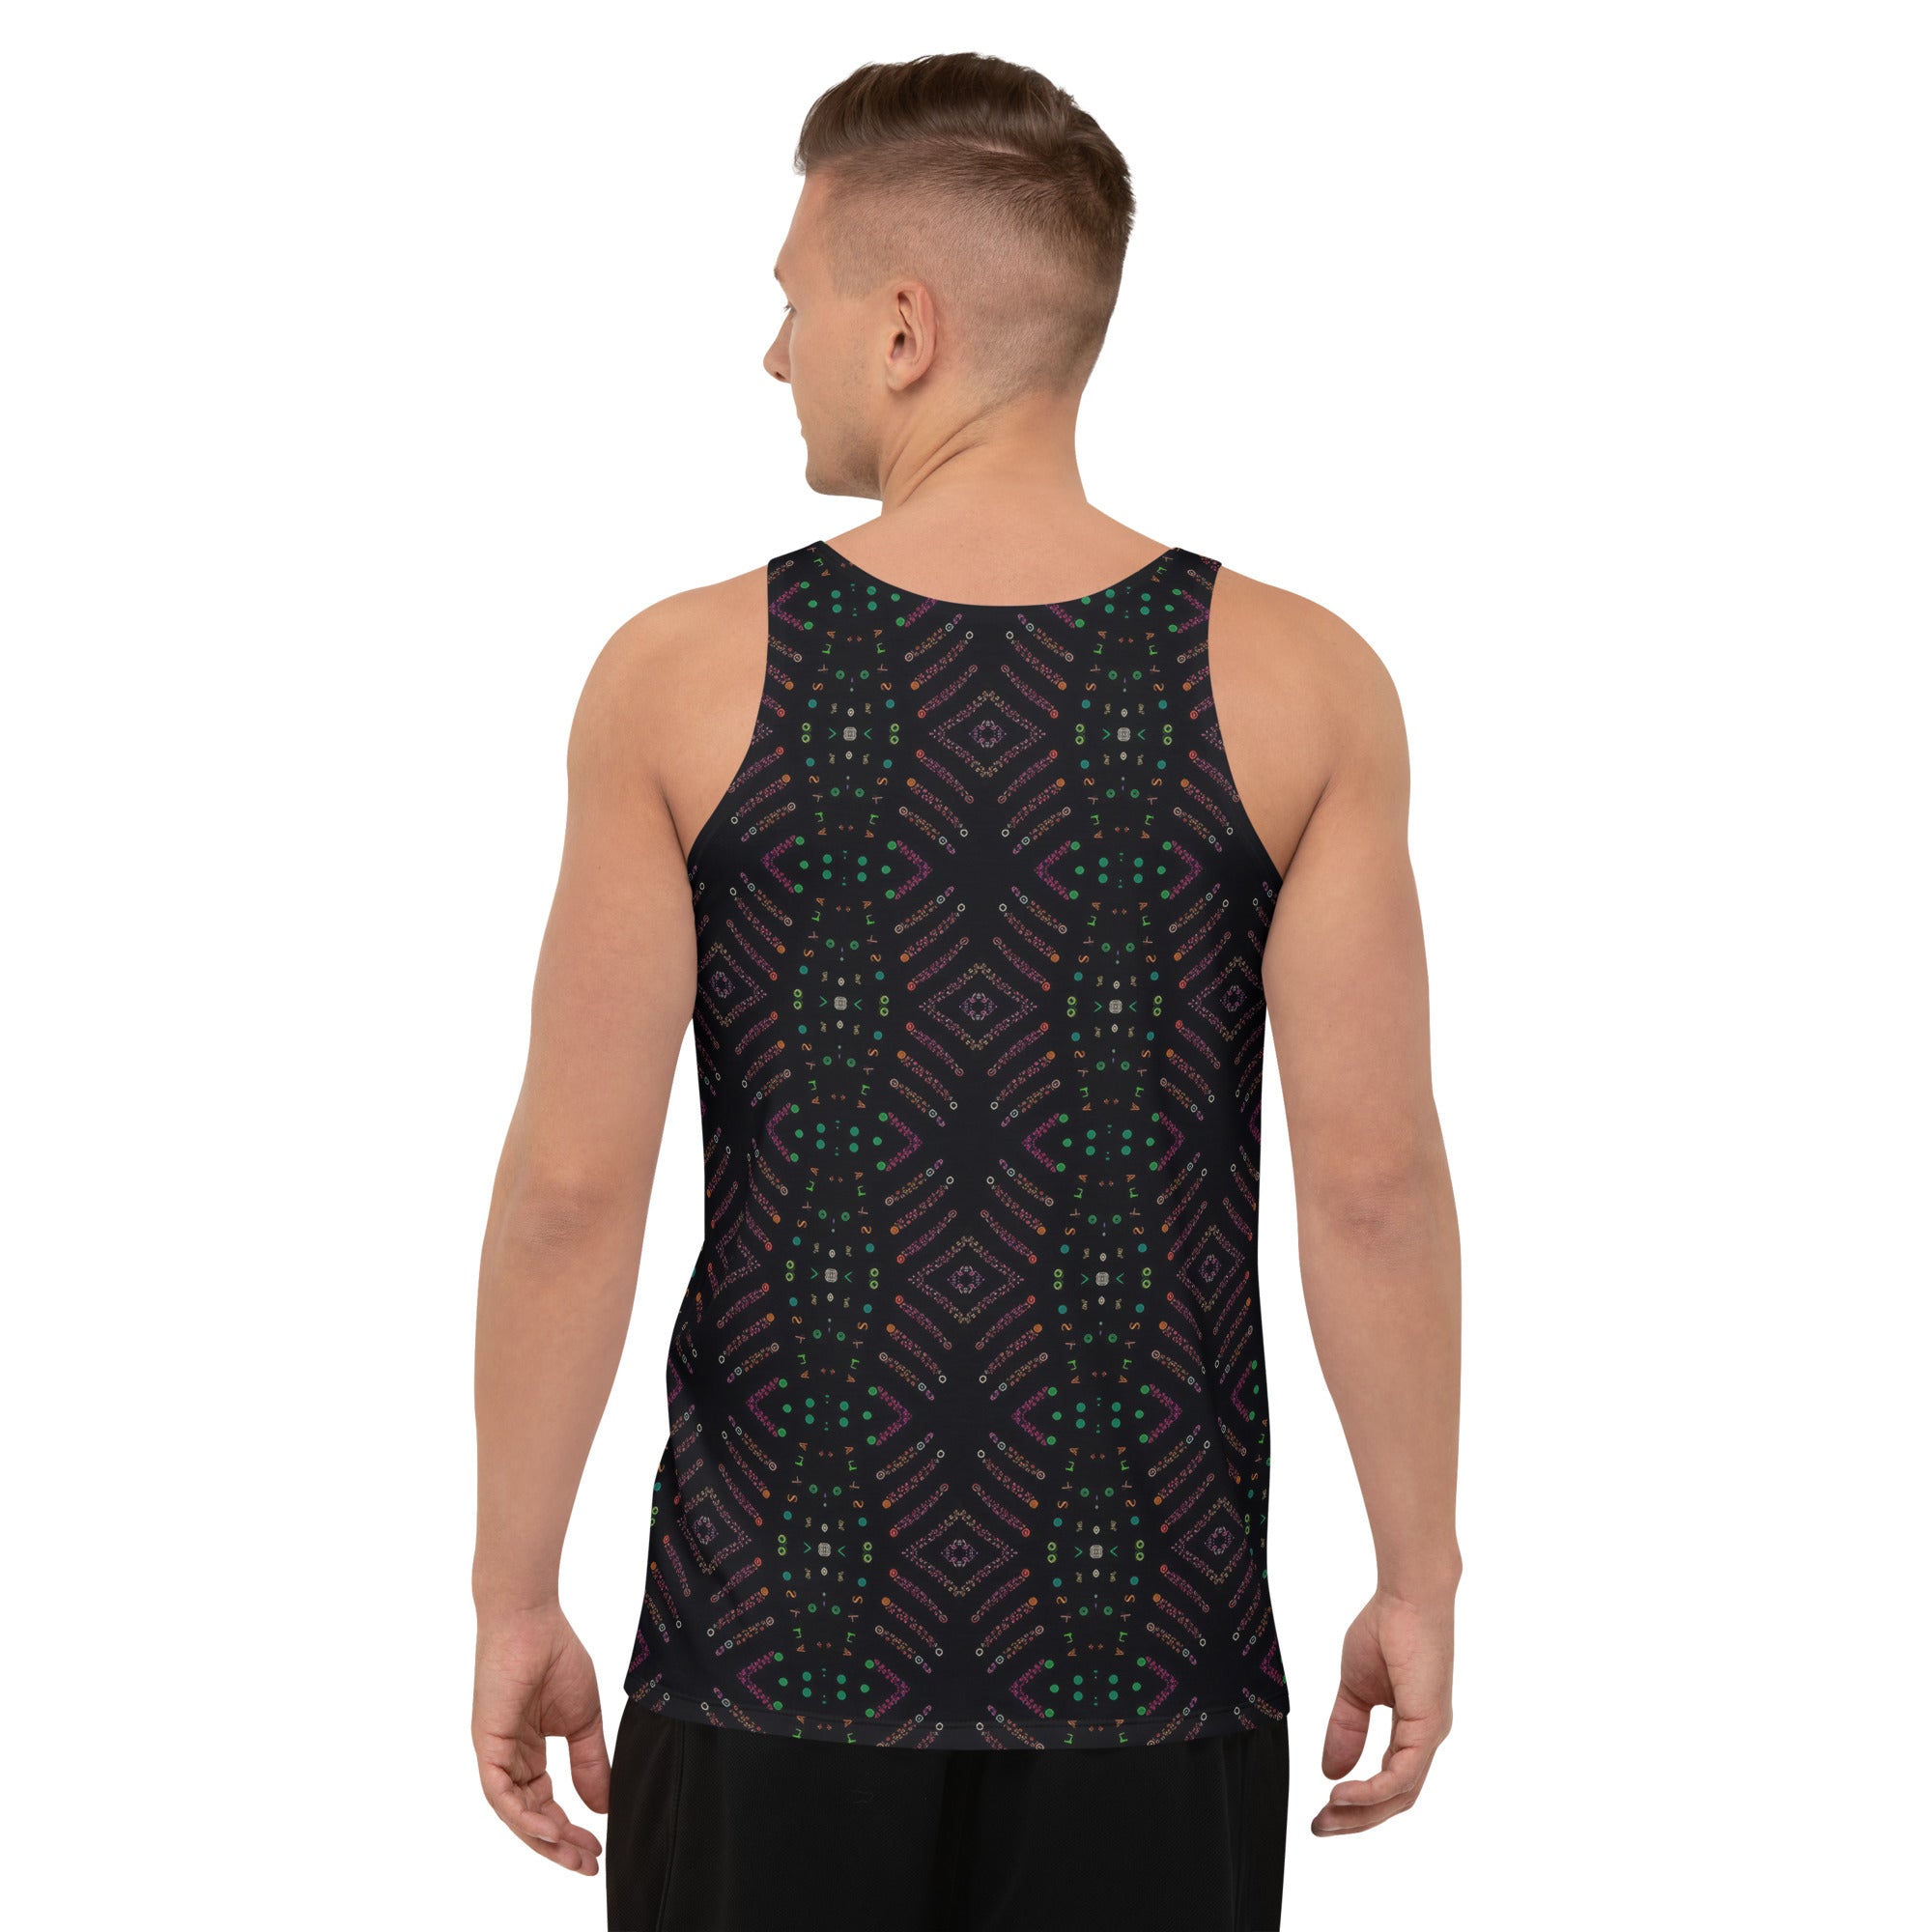 Stylish men wearing a colorful sketch design tank top for summer.